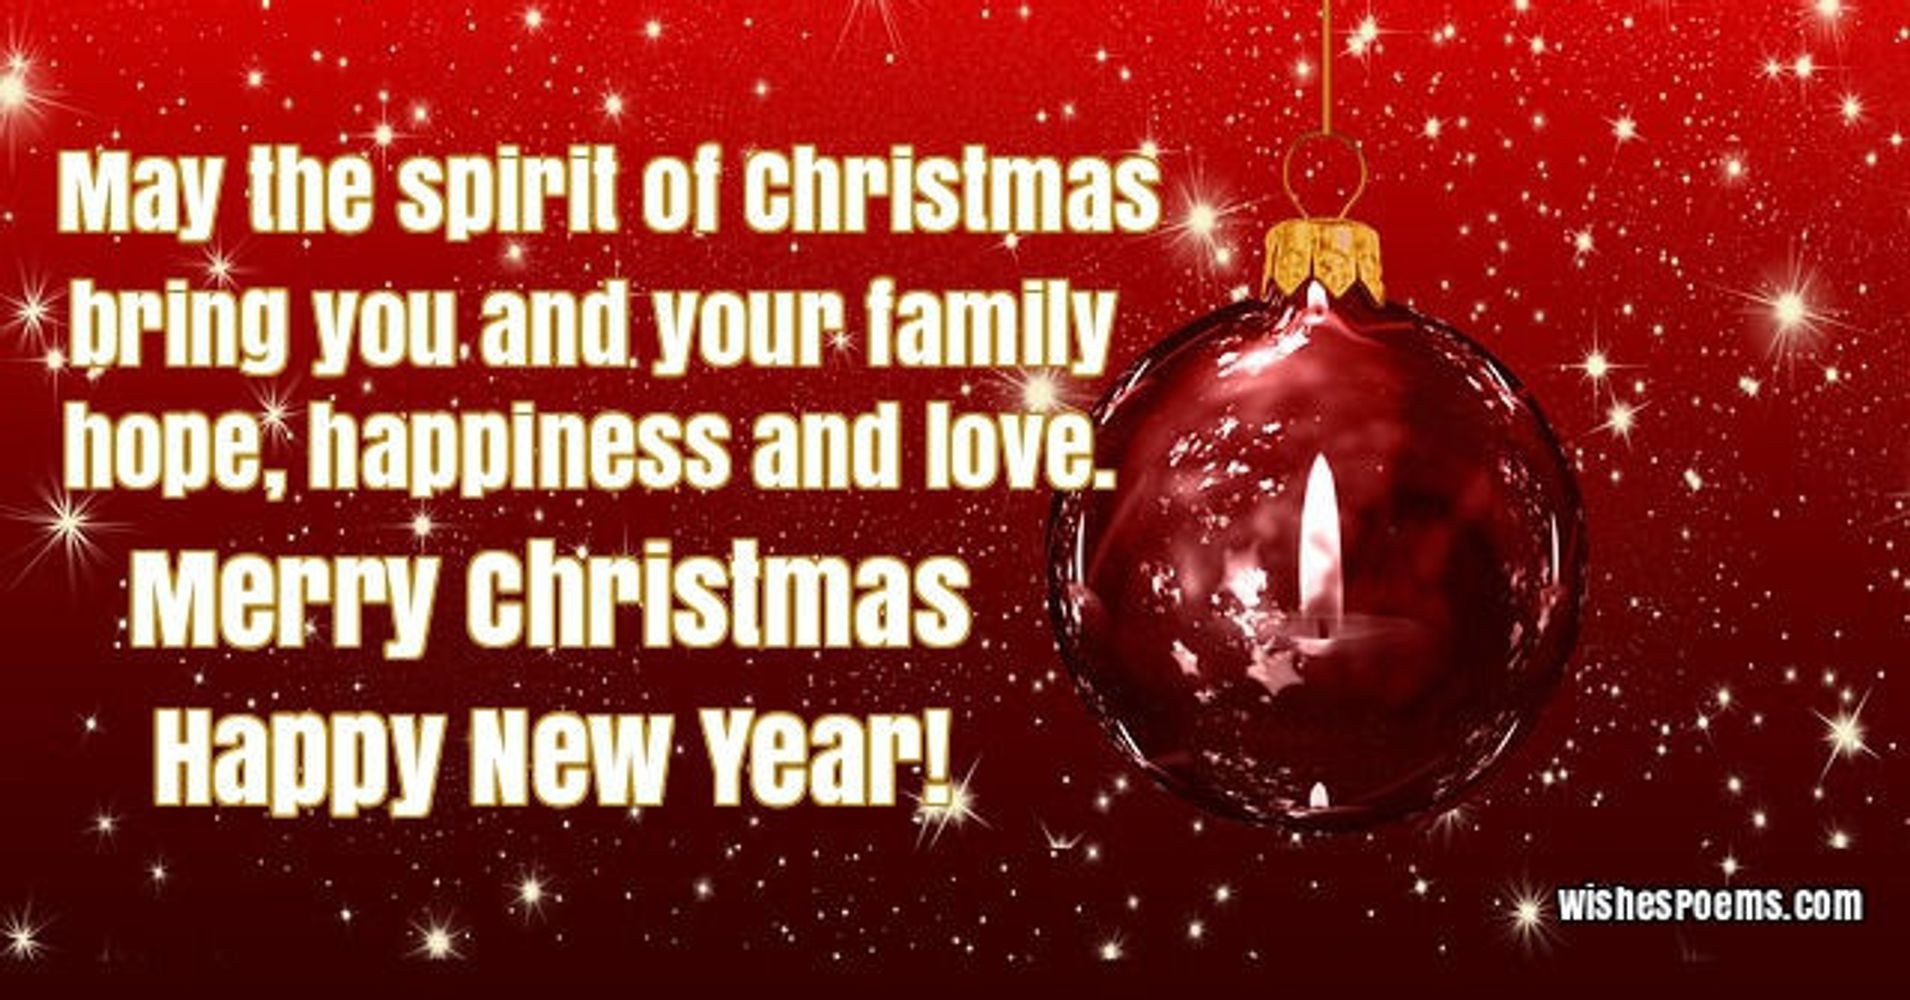 Merry Christmas And Happy New Year Quotes
 35 Christmas Card Messages What to Write in a Christmas